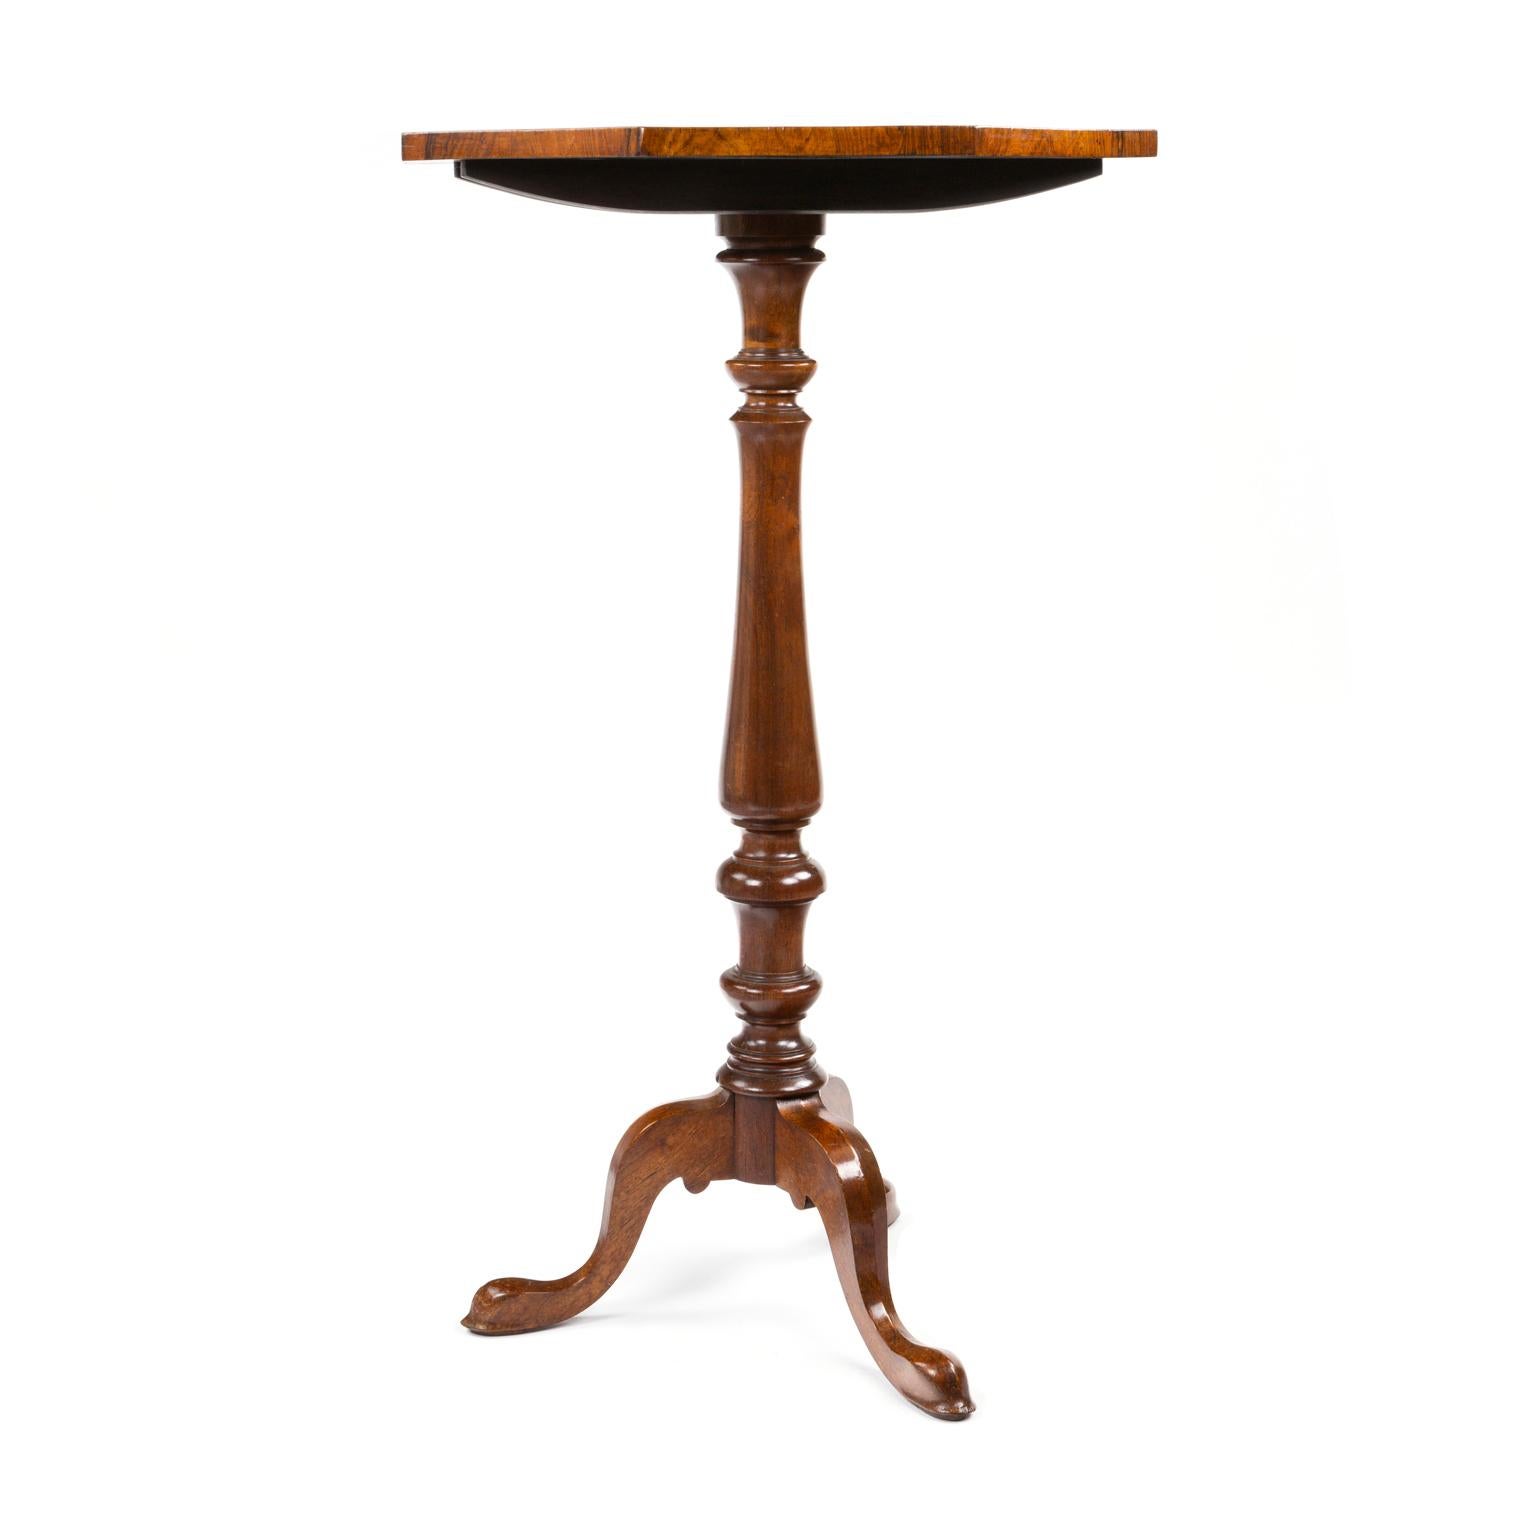 British Regency Rosewood Chess Table Accedited to Gillows of Lancaster and London